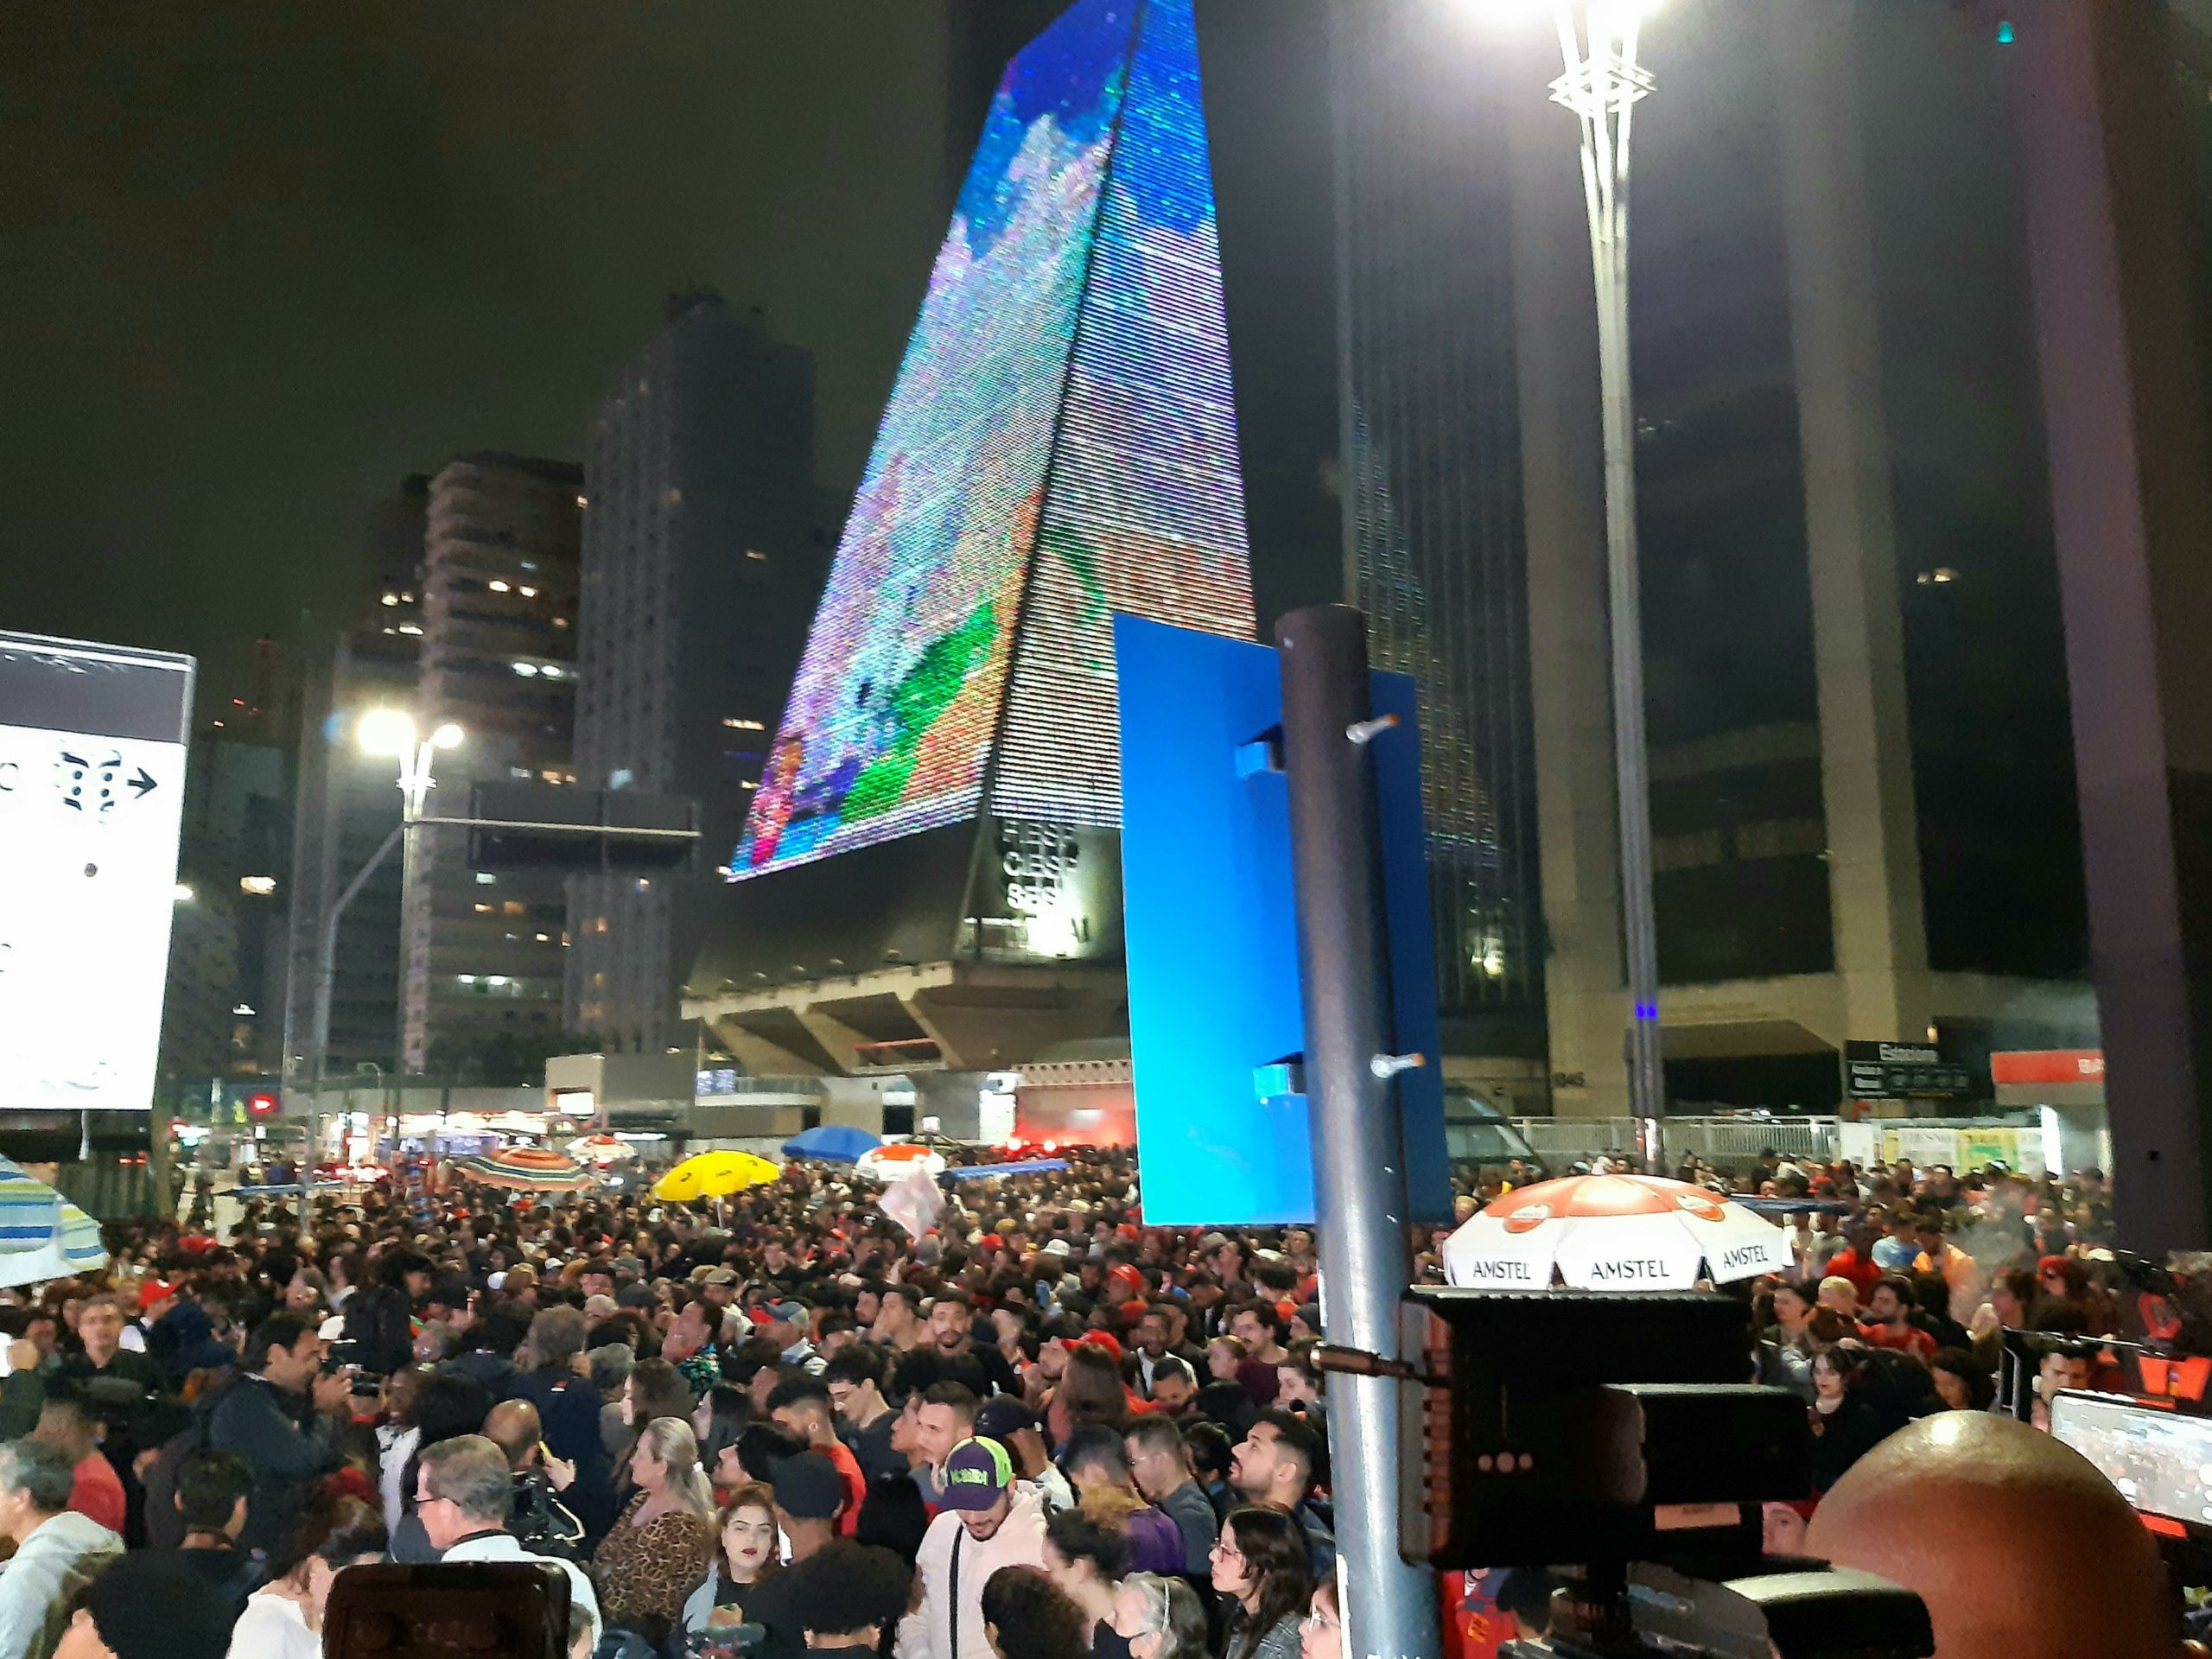 The crowd in front of the CNN Brasil headquarters shortly after Workers' Party presidential candidate Luiz Inácio "Lula" da Silva took the lead / credit: Richard Matoušek